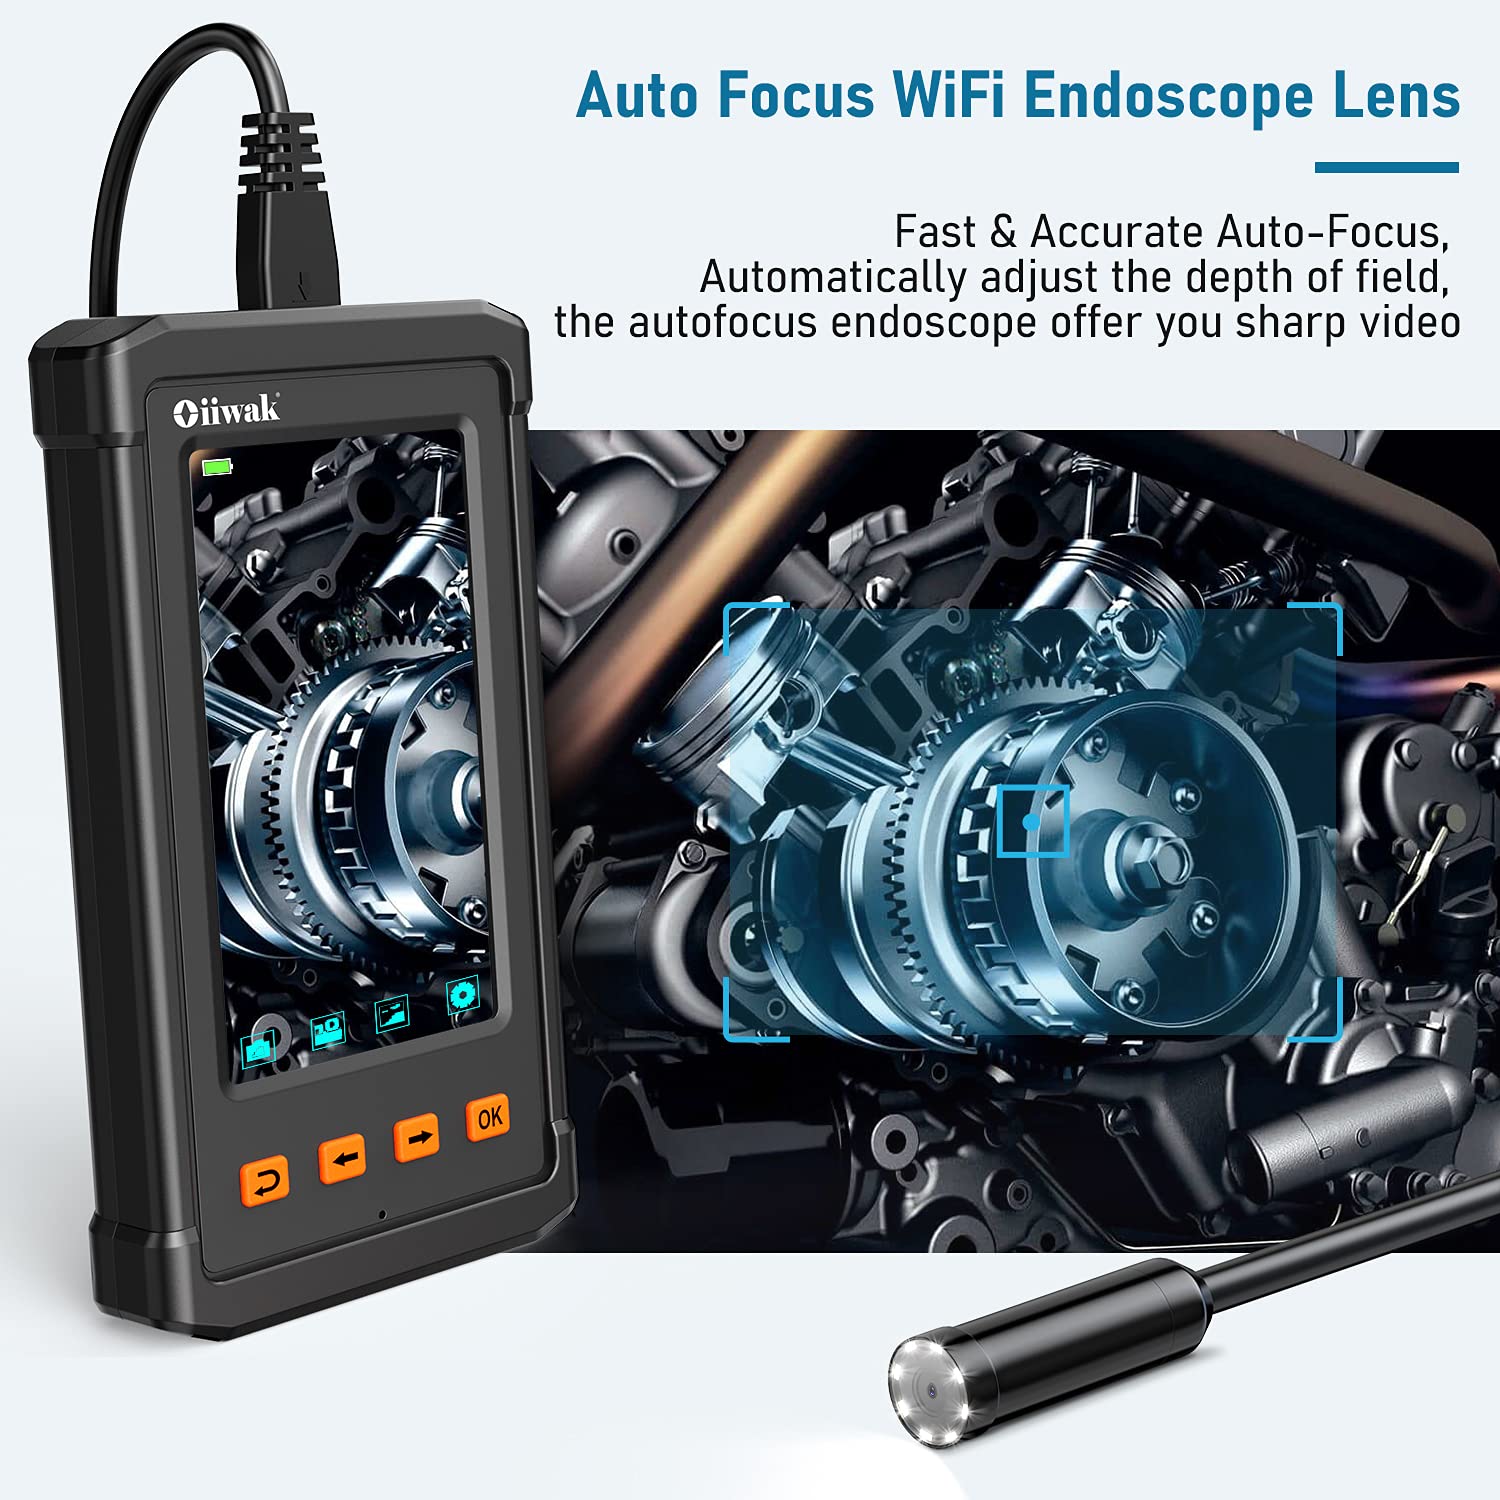 10M Inspection Endoscope Lens IP67 Waterproof F240 3.9mm Wireless Endoscope Camera for Electrical Maintenance,Drainage Pipelines Machinery Car Engine Maintenance 